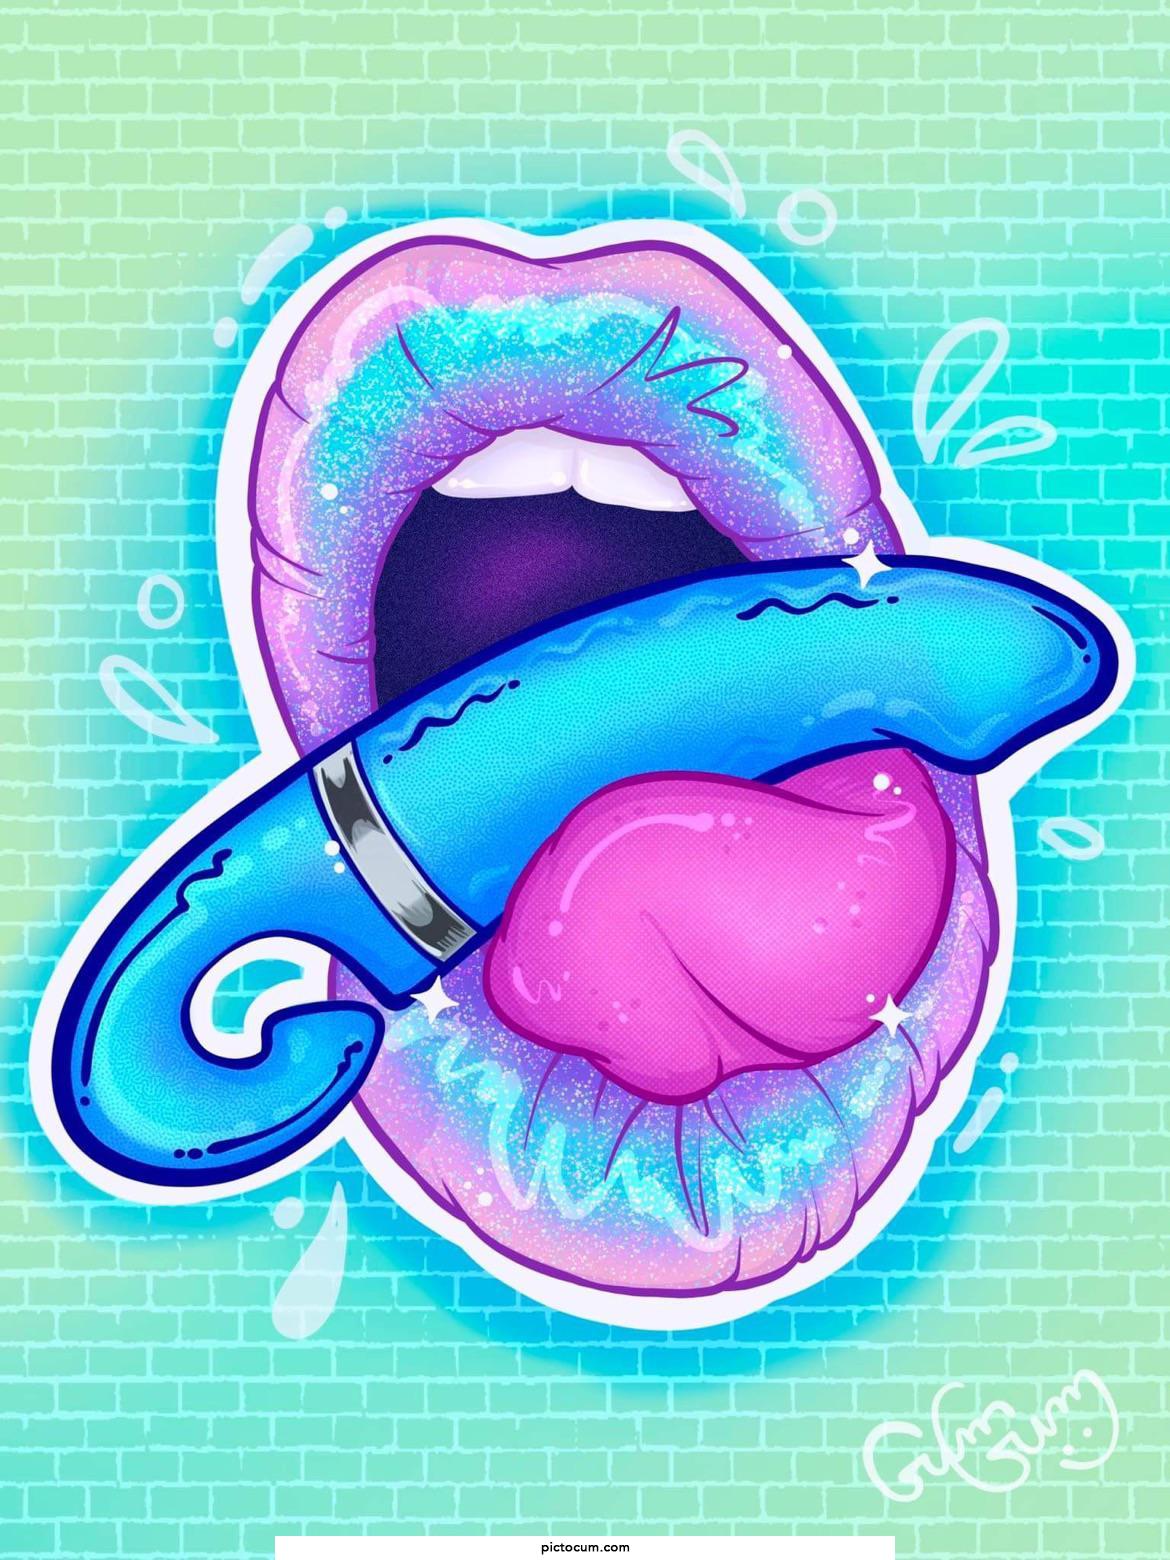 I've had some fun with this sticker/y kind if NSFW illustration. Makes me think - would you purchase stickers of this kind?